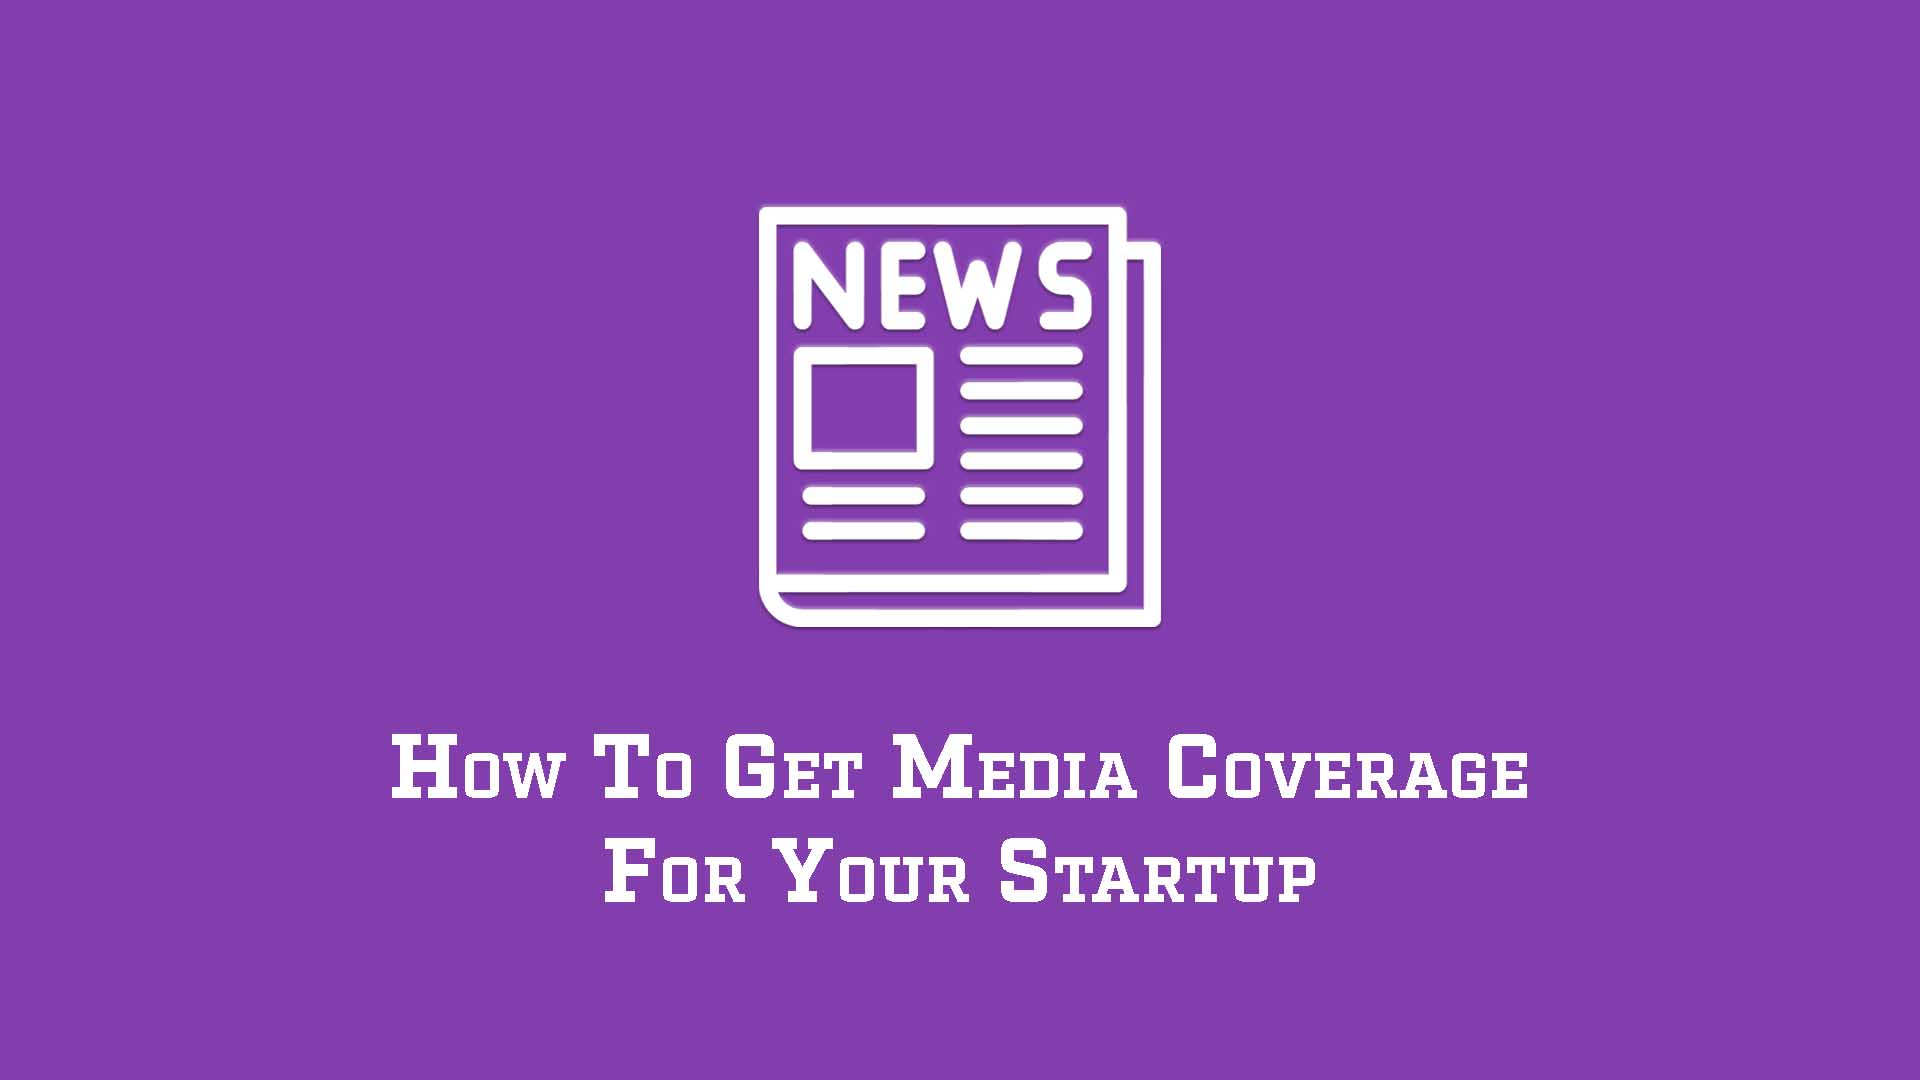 How To Get Media Coverage For Your Startup